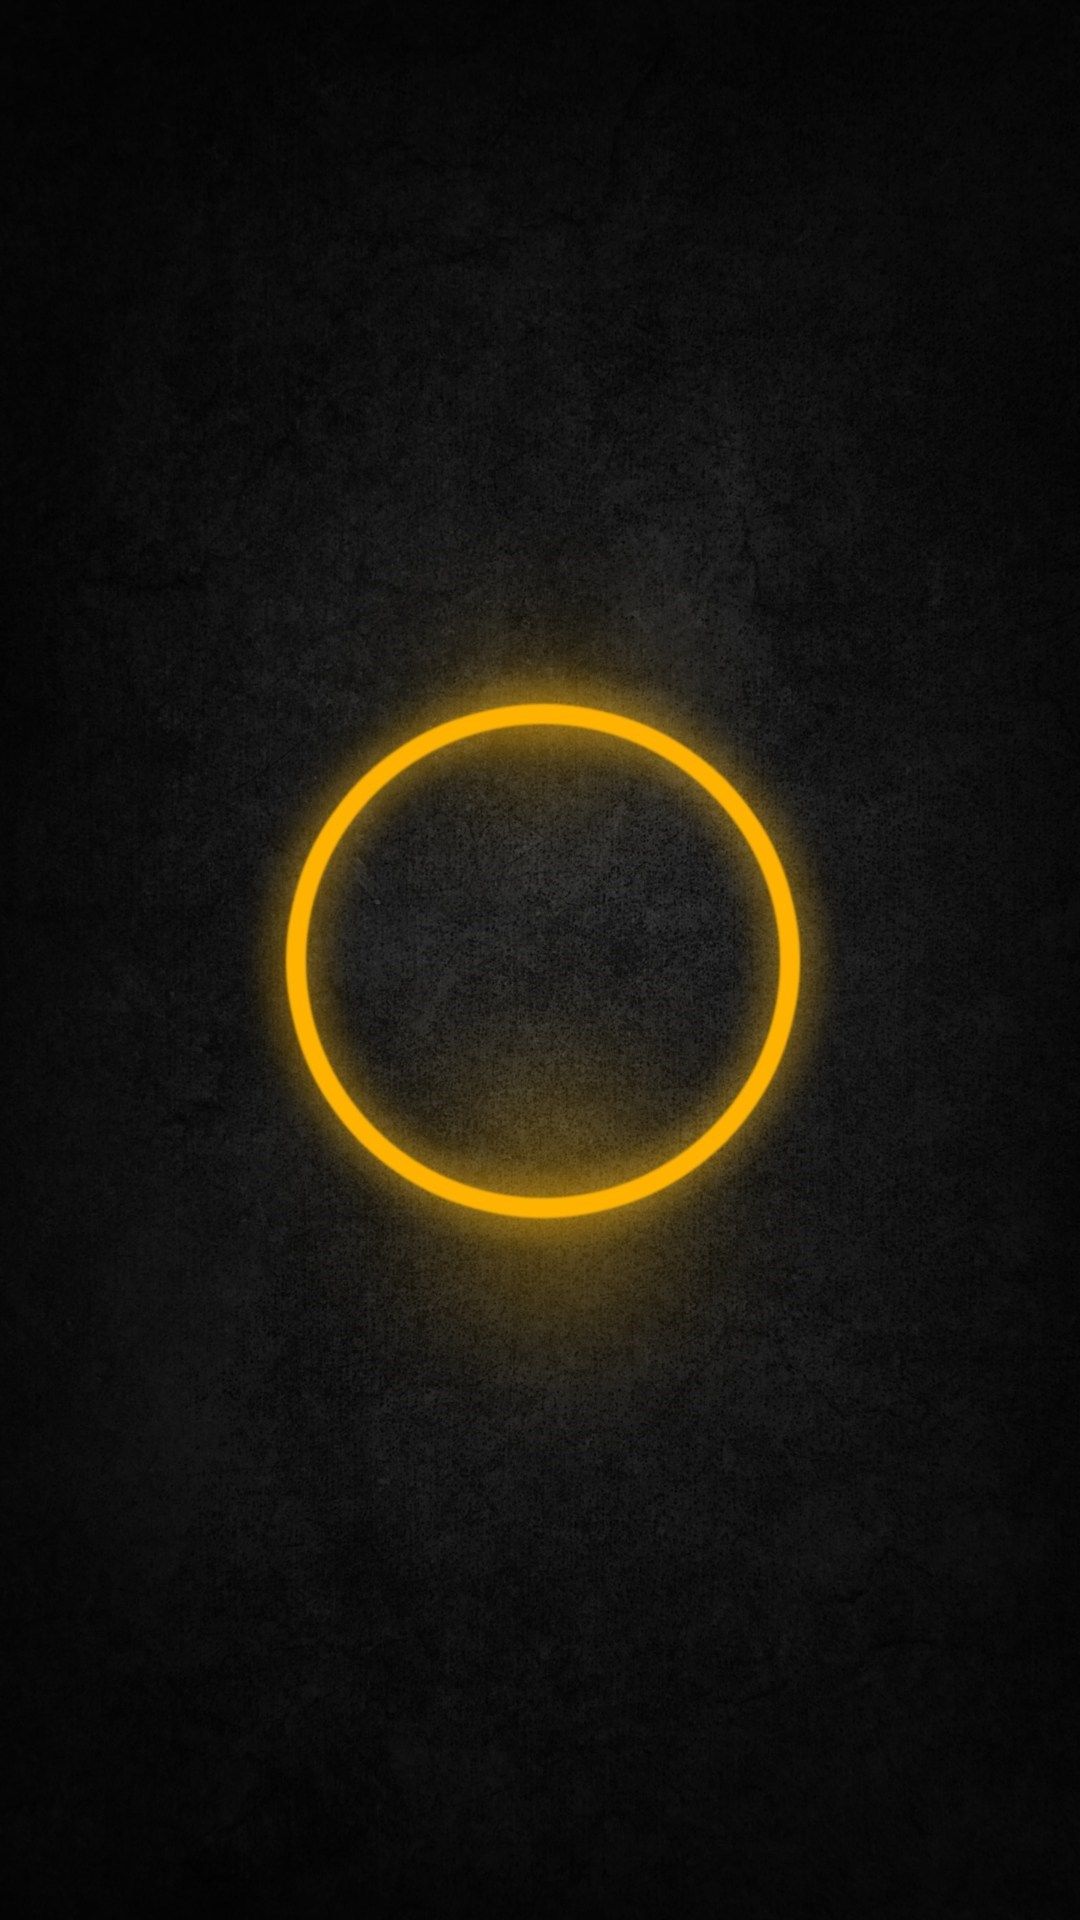 Yellow Halo iPhone 6 / 6 Plus and iPhone 5 / 4 Backgrounds